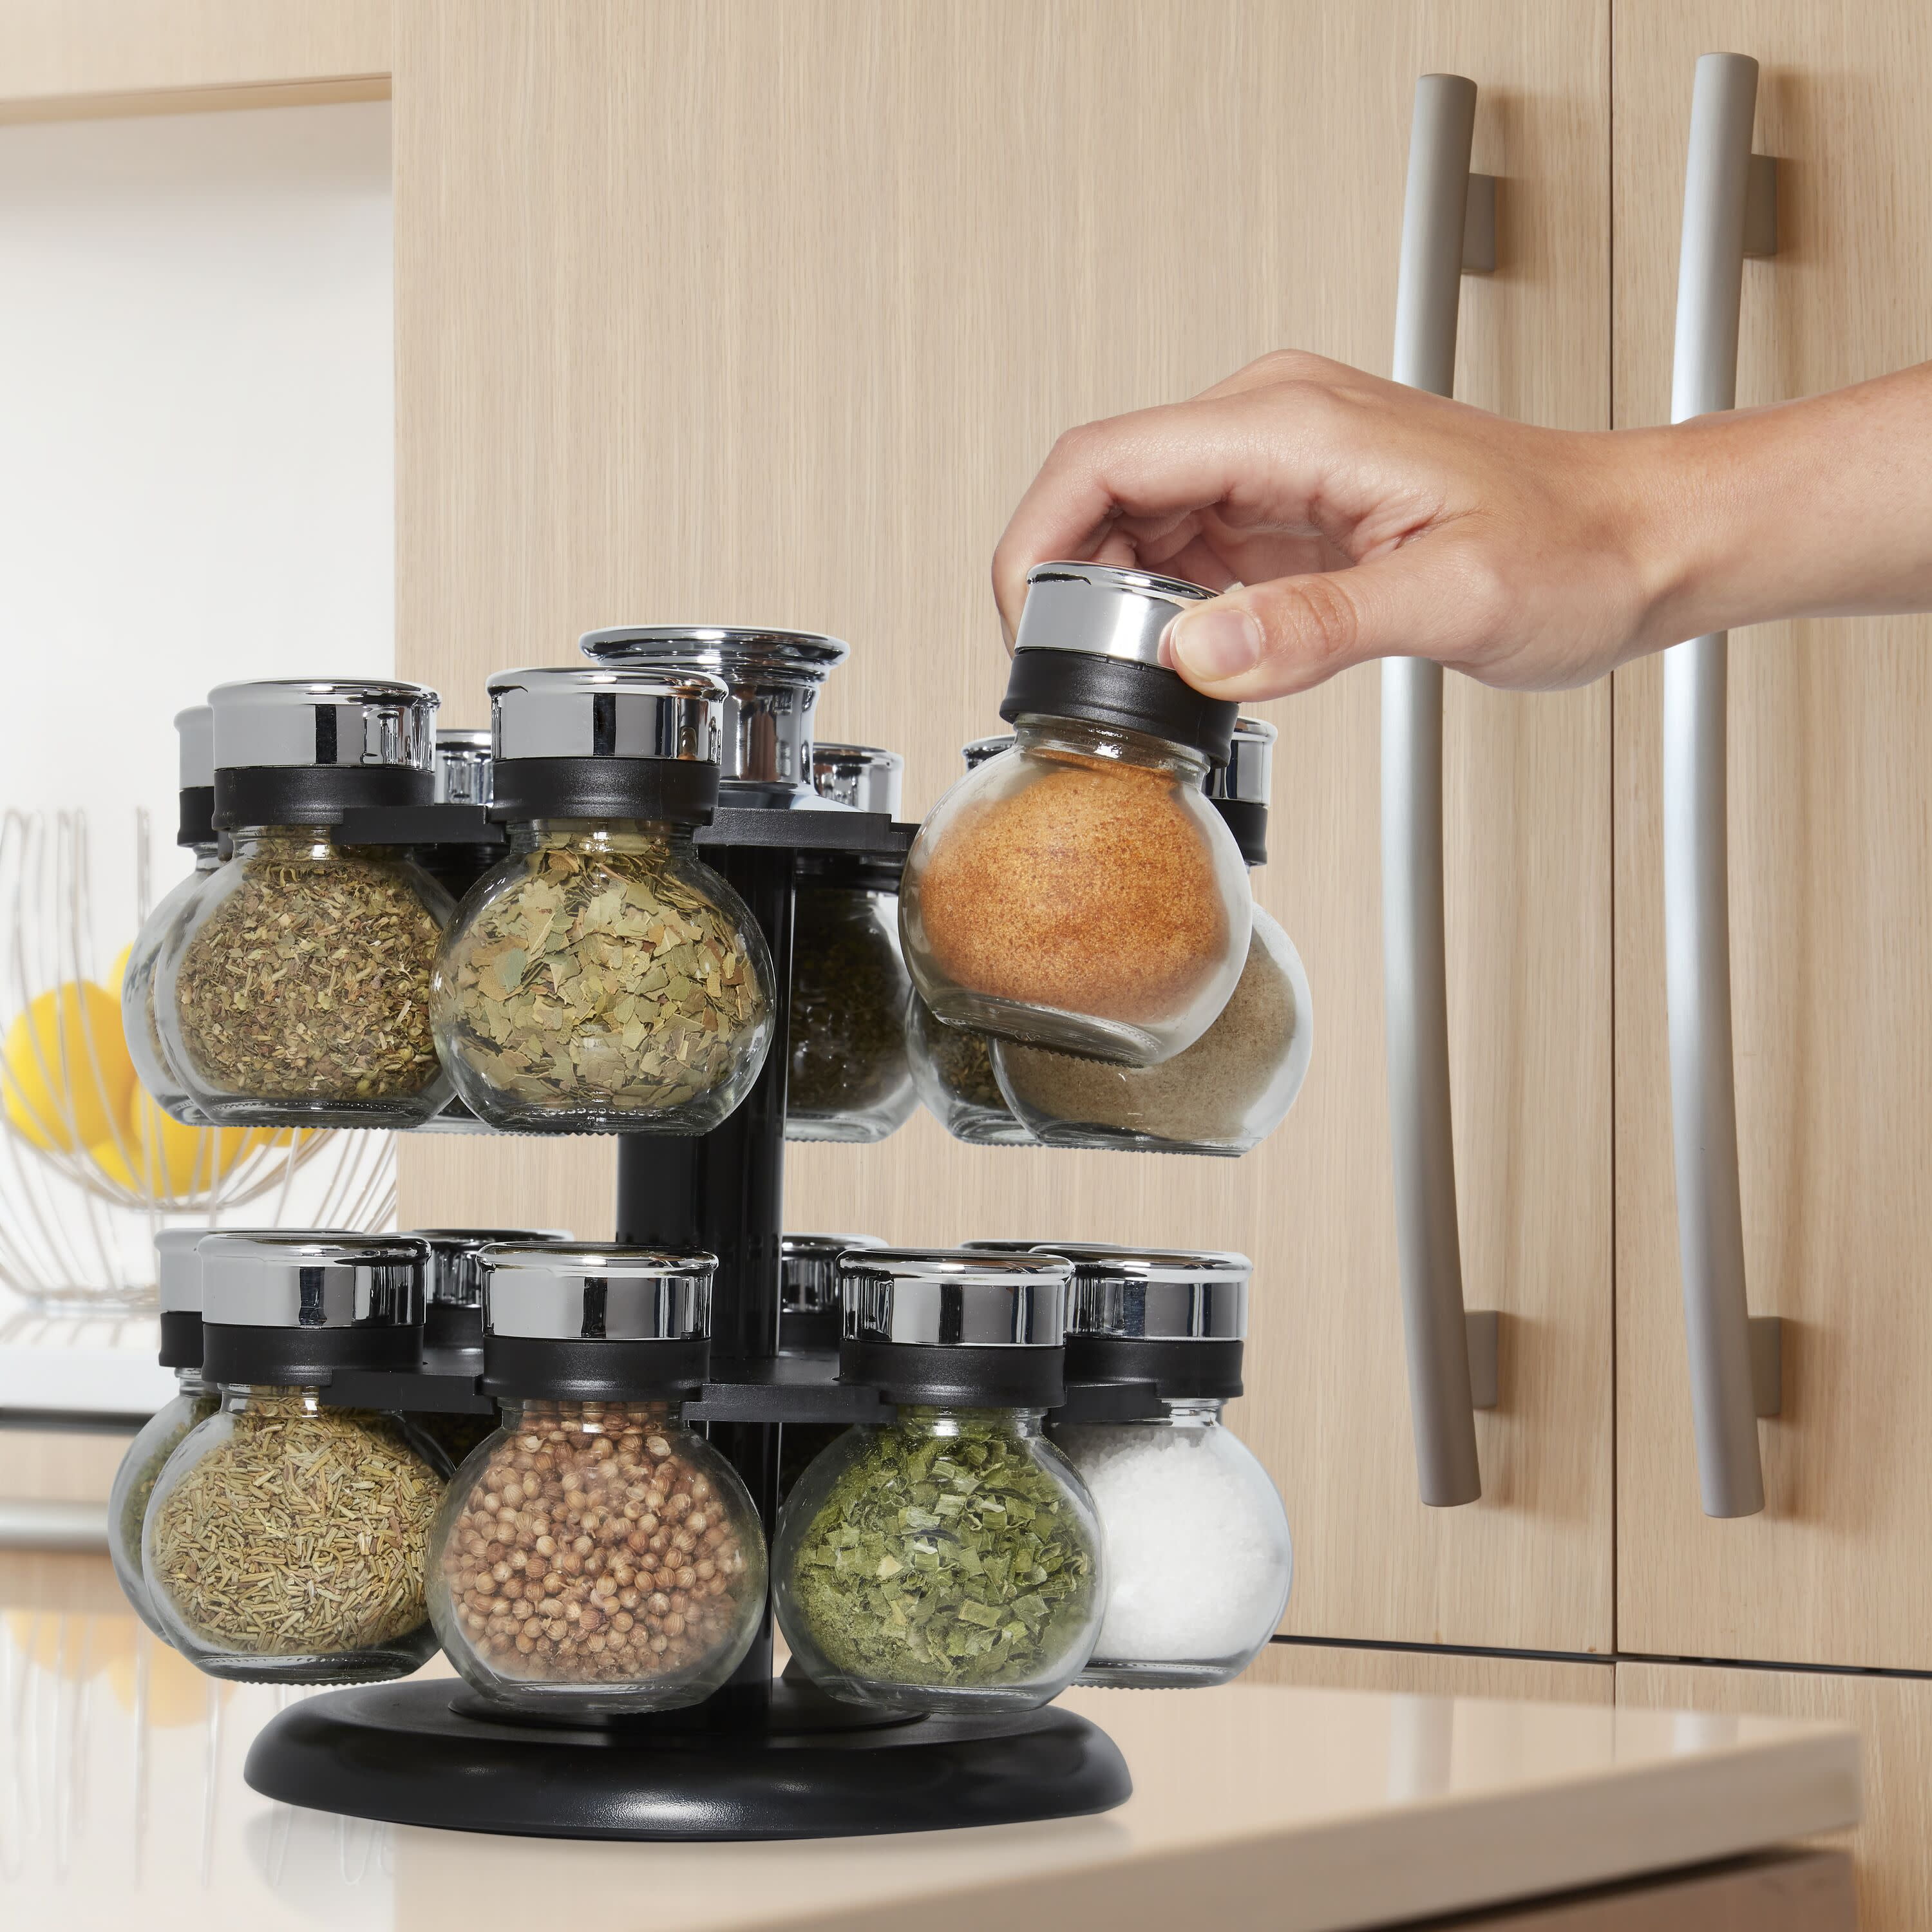  Kamenstein 15 Jar Lincoln Countertop Spice Rack with Spices  Included, FREE Spice Refills for 5 Years, Chrome with Black Caps , 9.5 x  5.8 x 9: Home & Kitchen